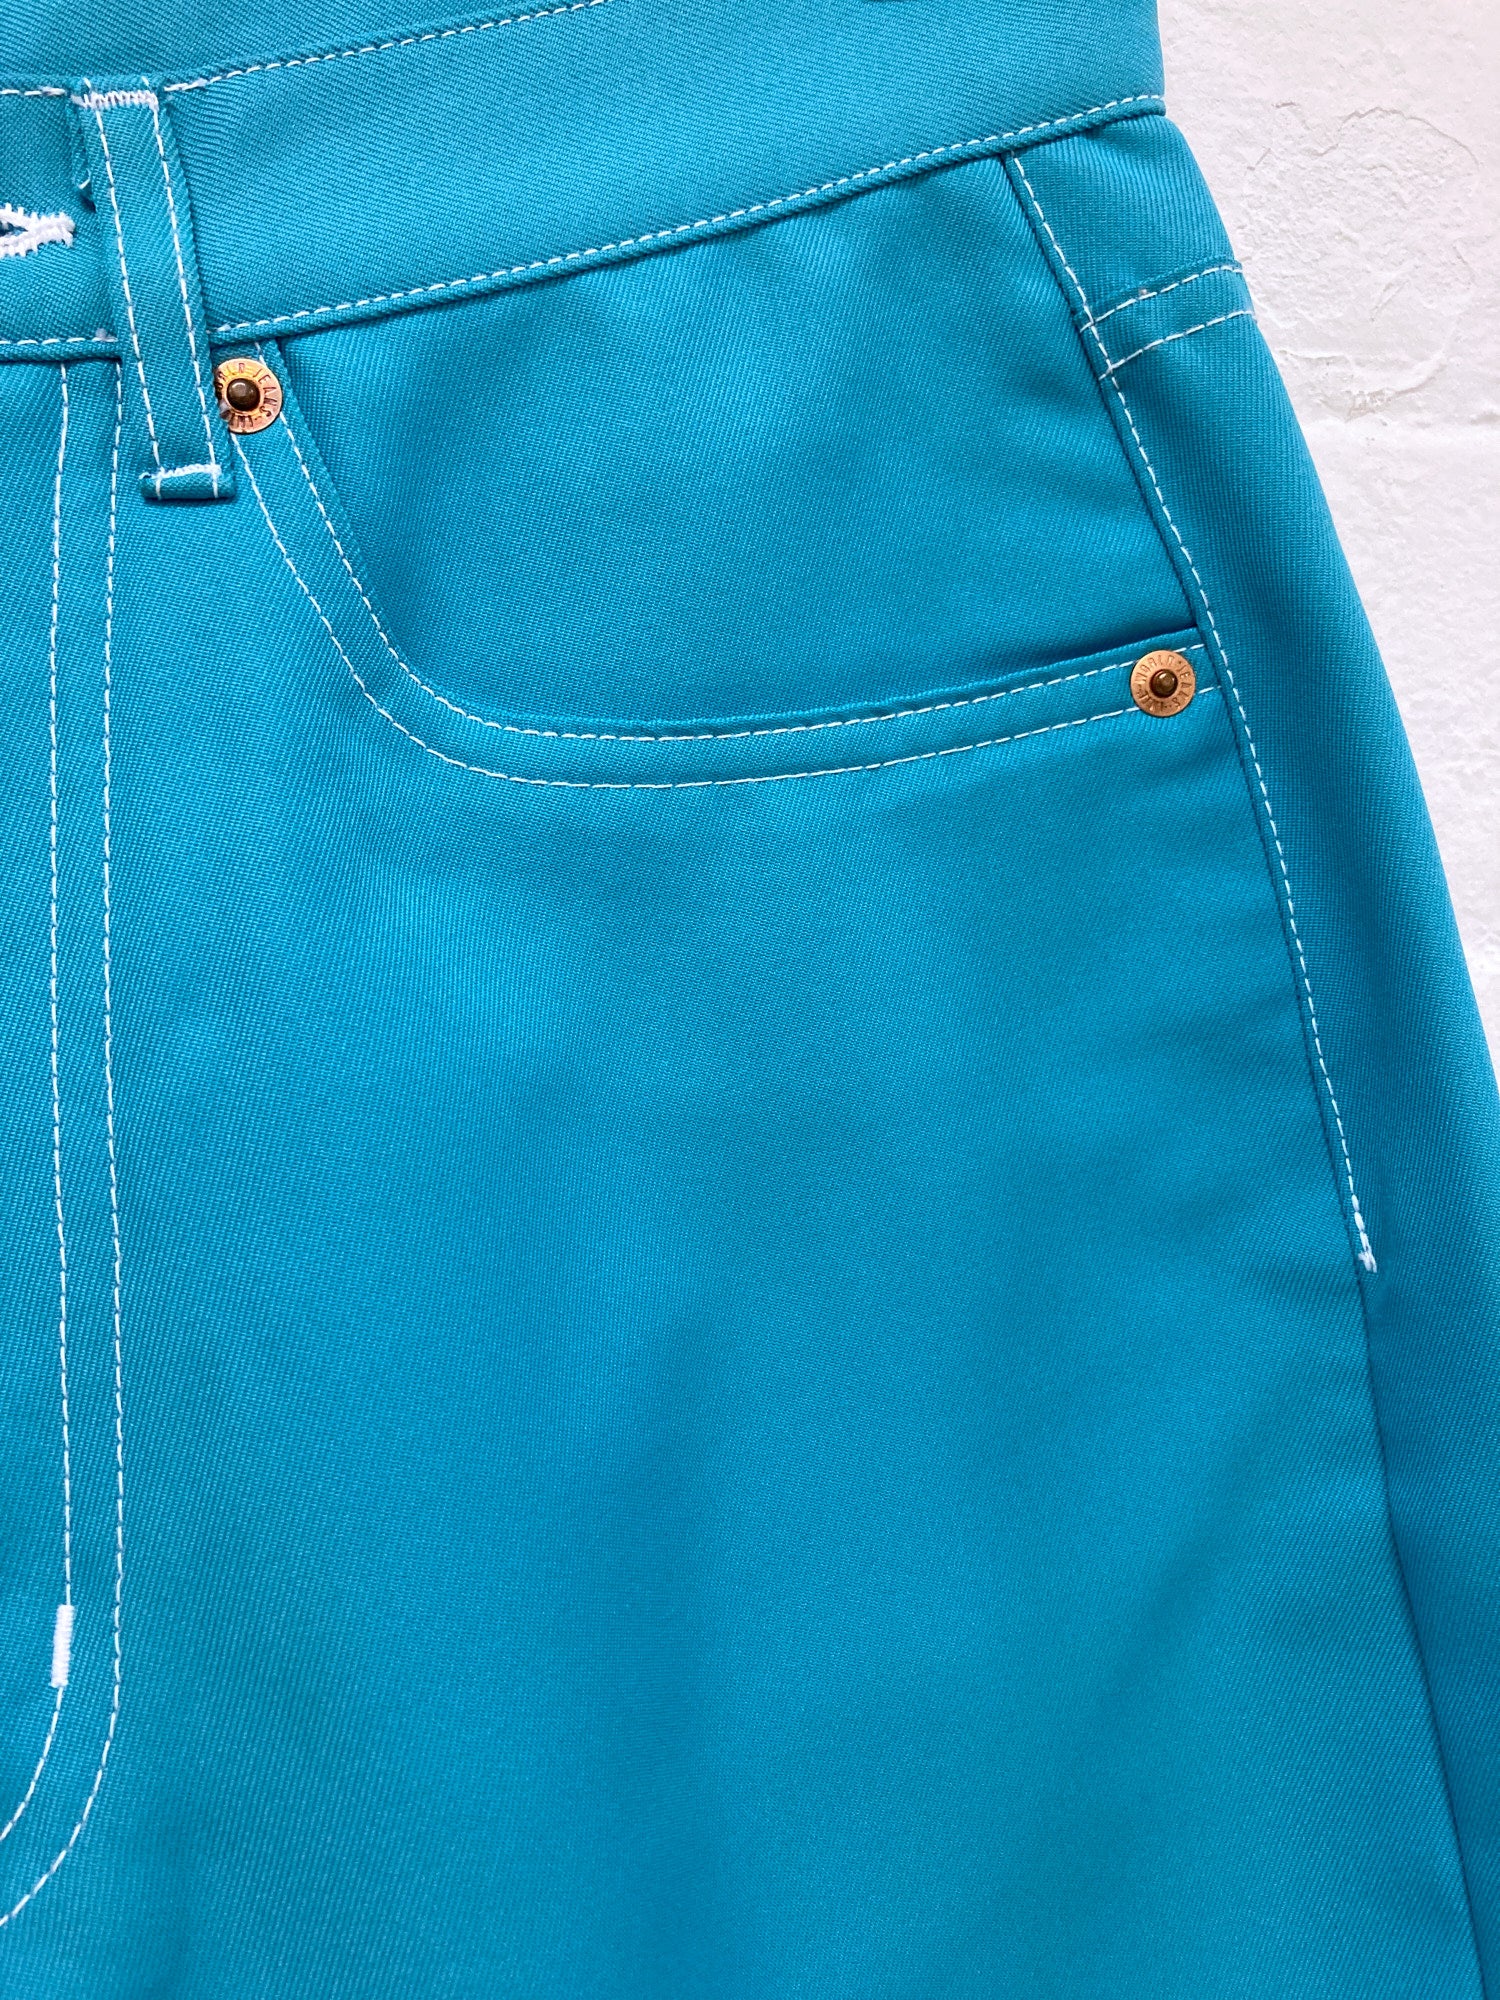 Comme des Garcons SS1996 turquoise blue polyester extra long jean trousers - M